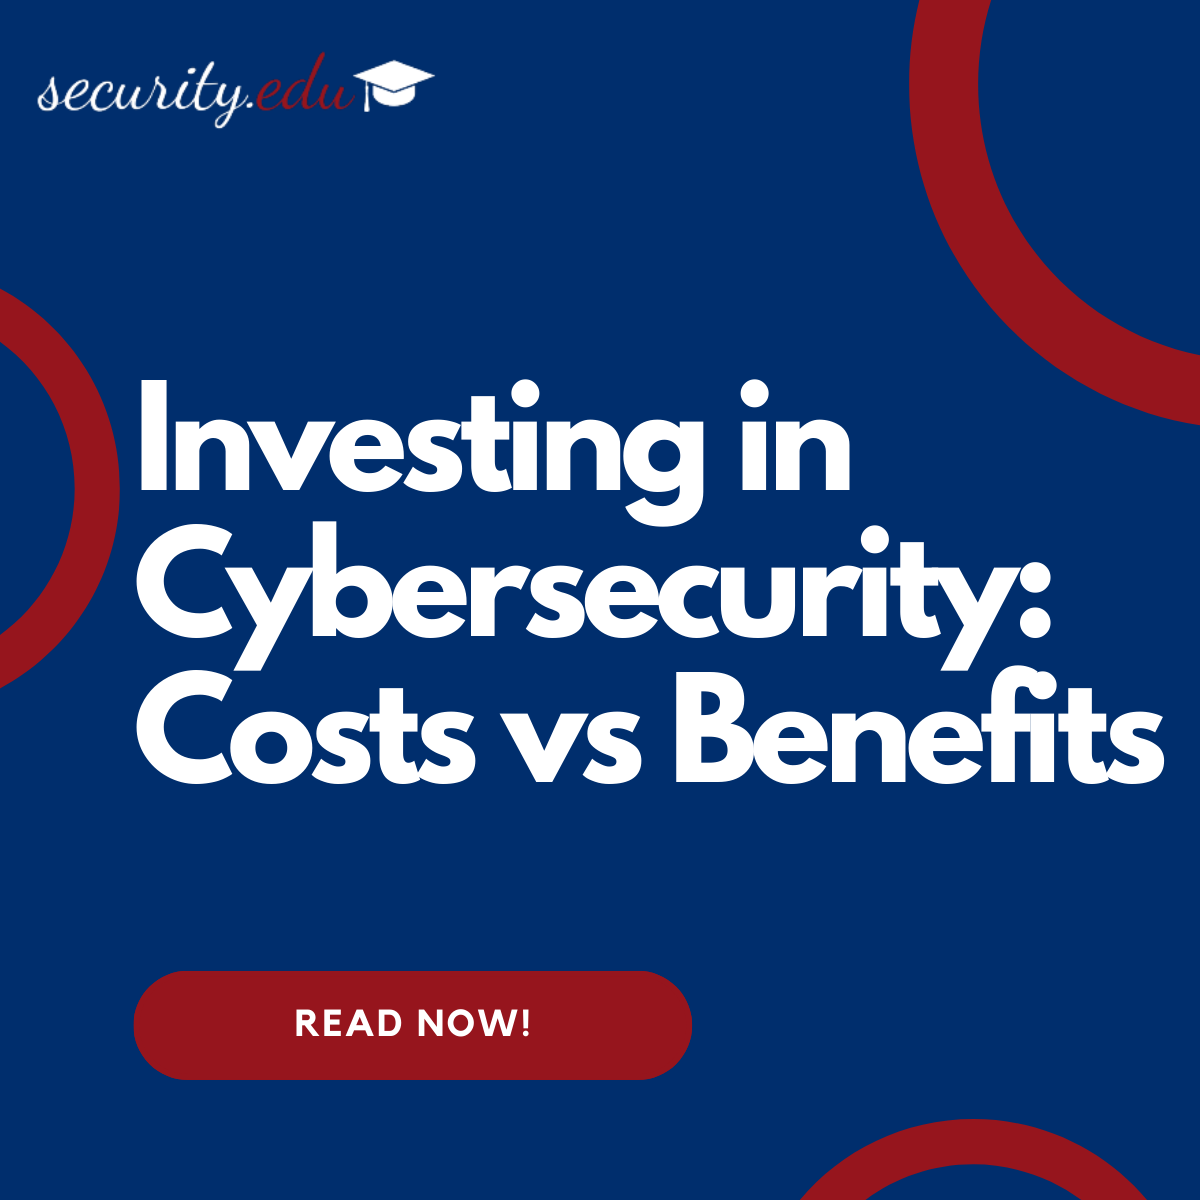 Investing in Cybersecurity - Costs vs Benefits